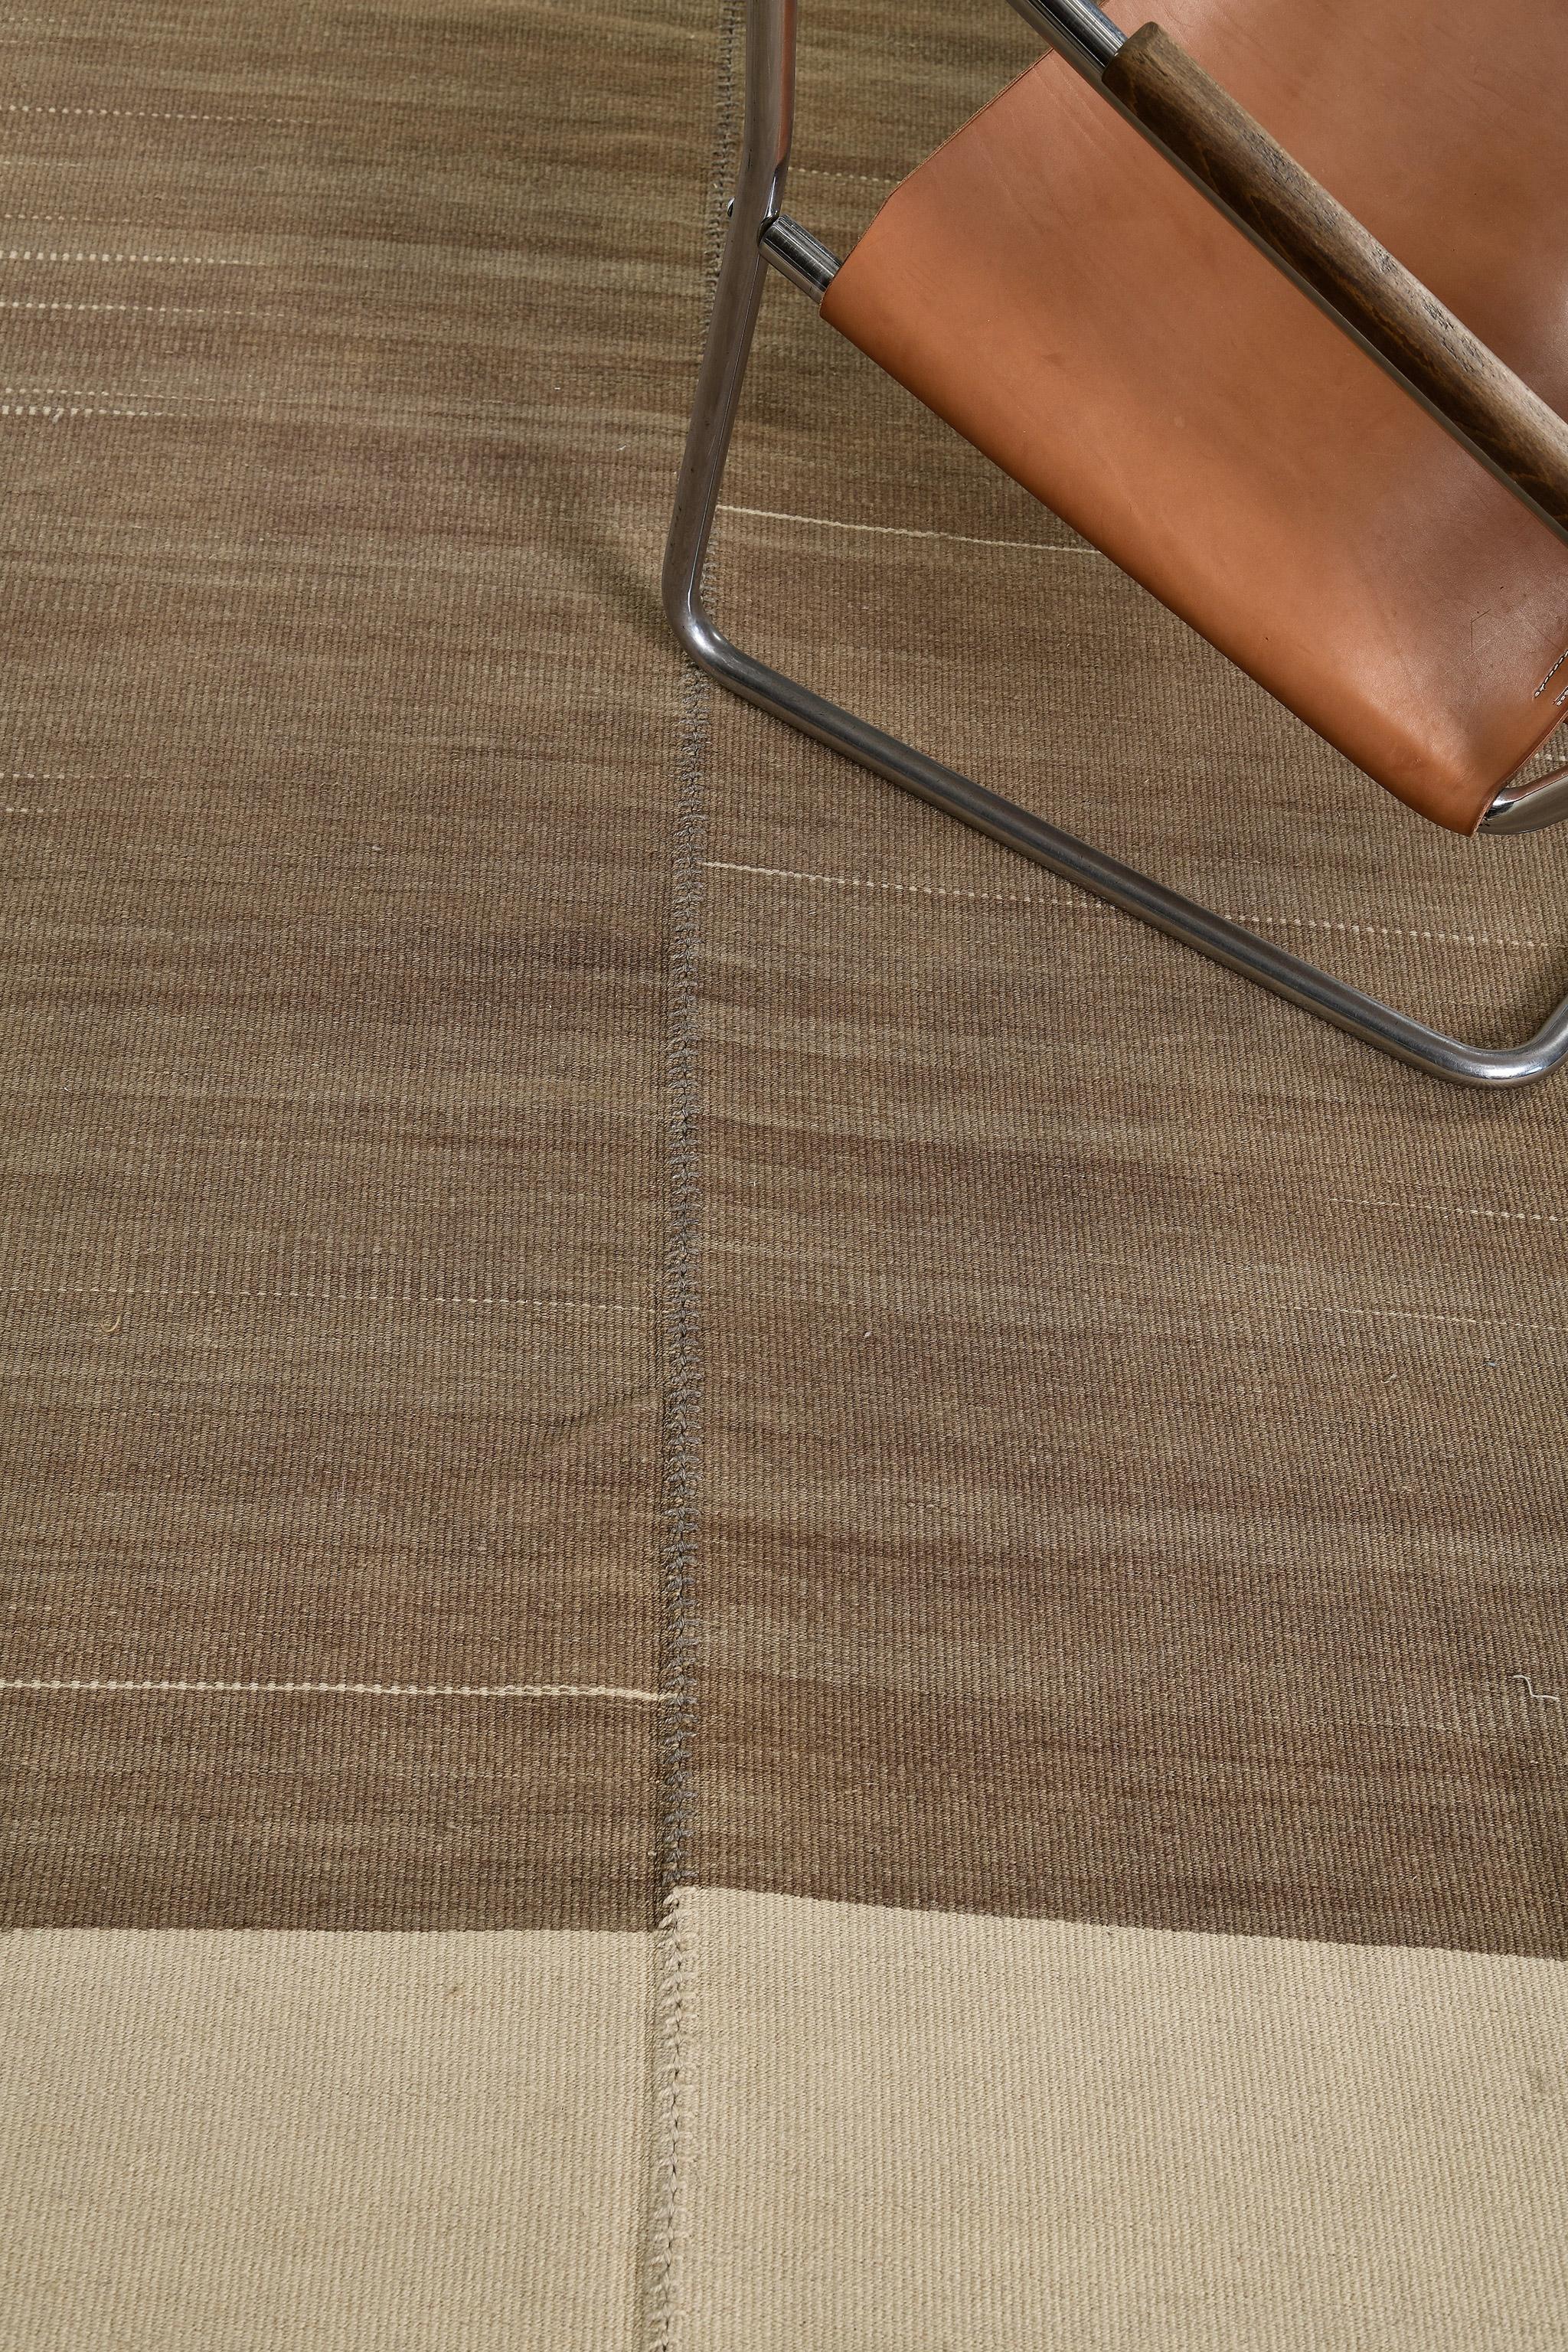 Mehraban Contemporary Flat-Weave Rug Volare Collection In New Condition For Sale In WEST HOLLYWOOD, CA